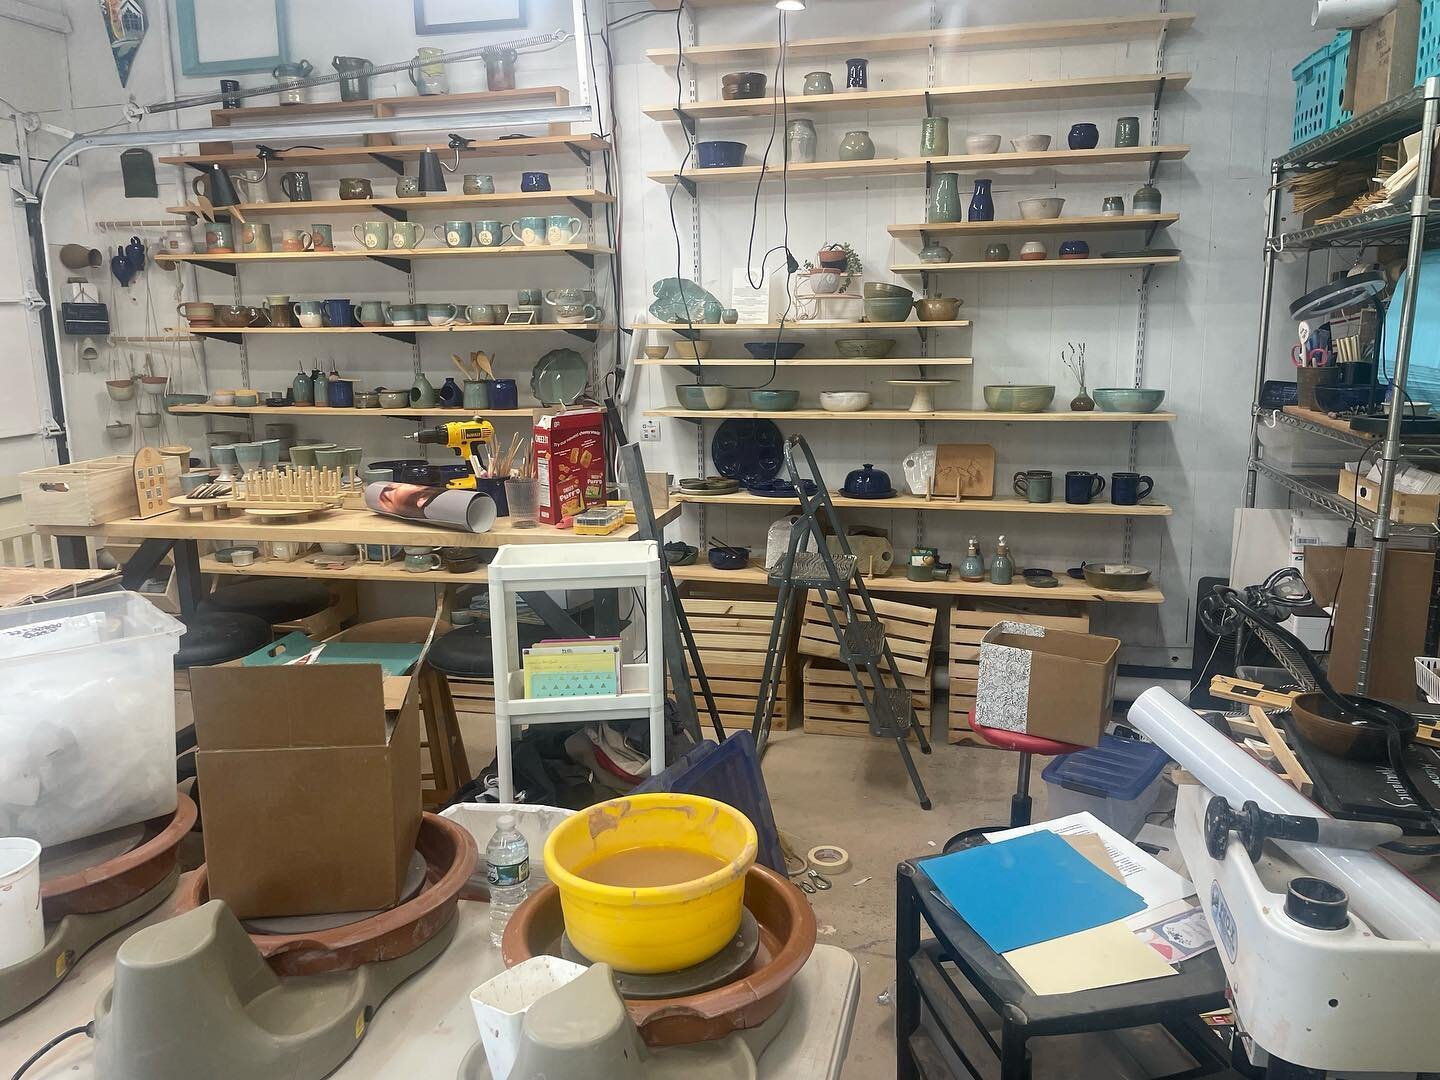 Making a big mess in the studio for some much needed additional shelving! Finished photo coming soon. #studiolife #potterystudio